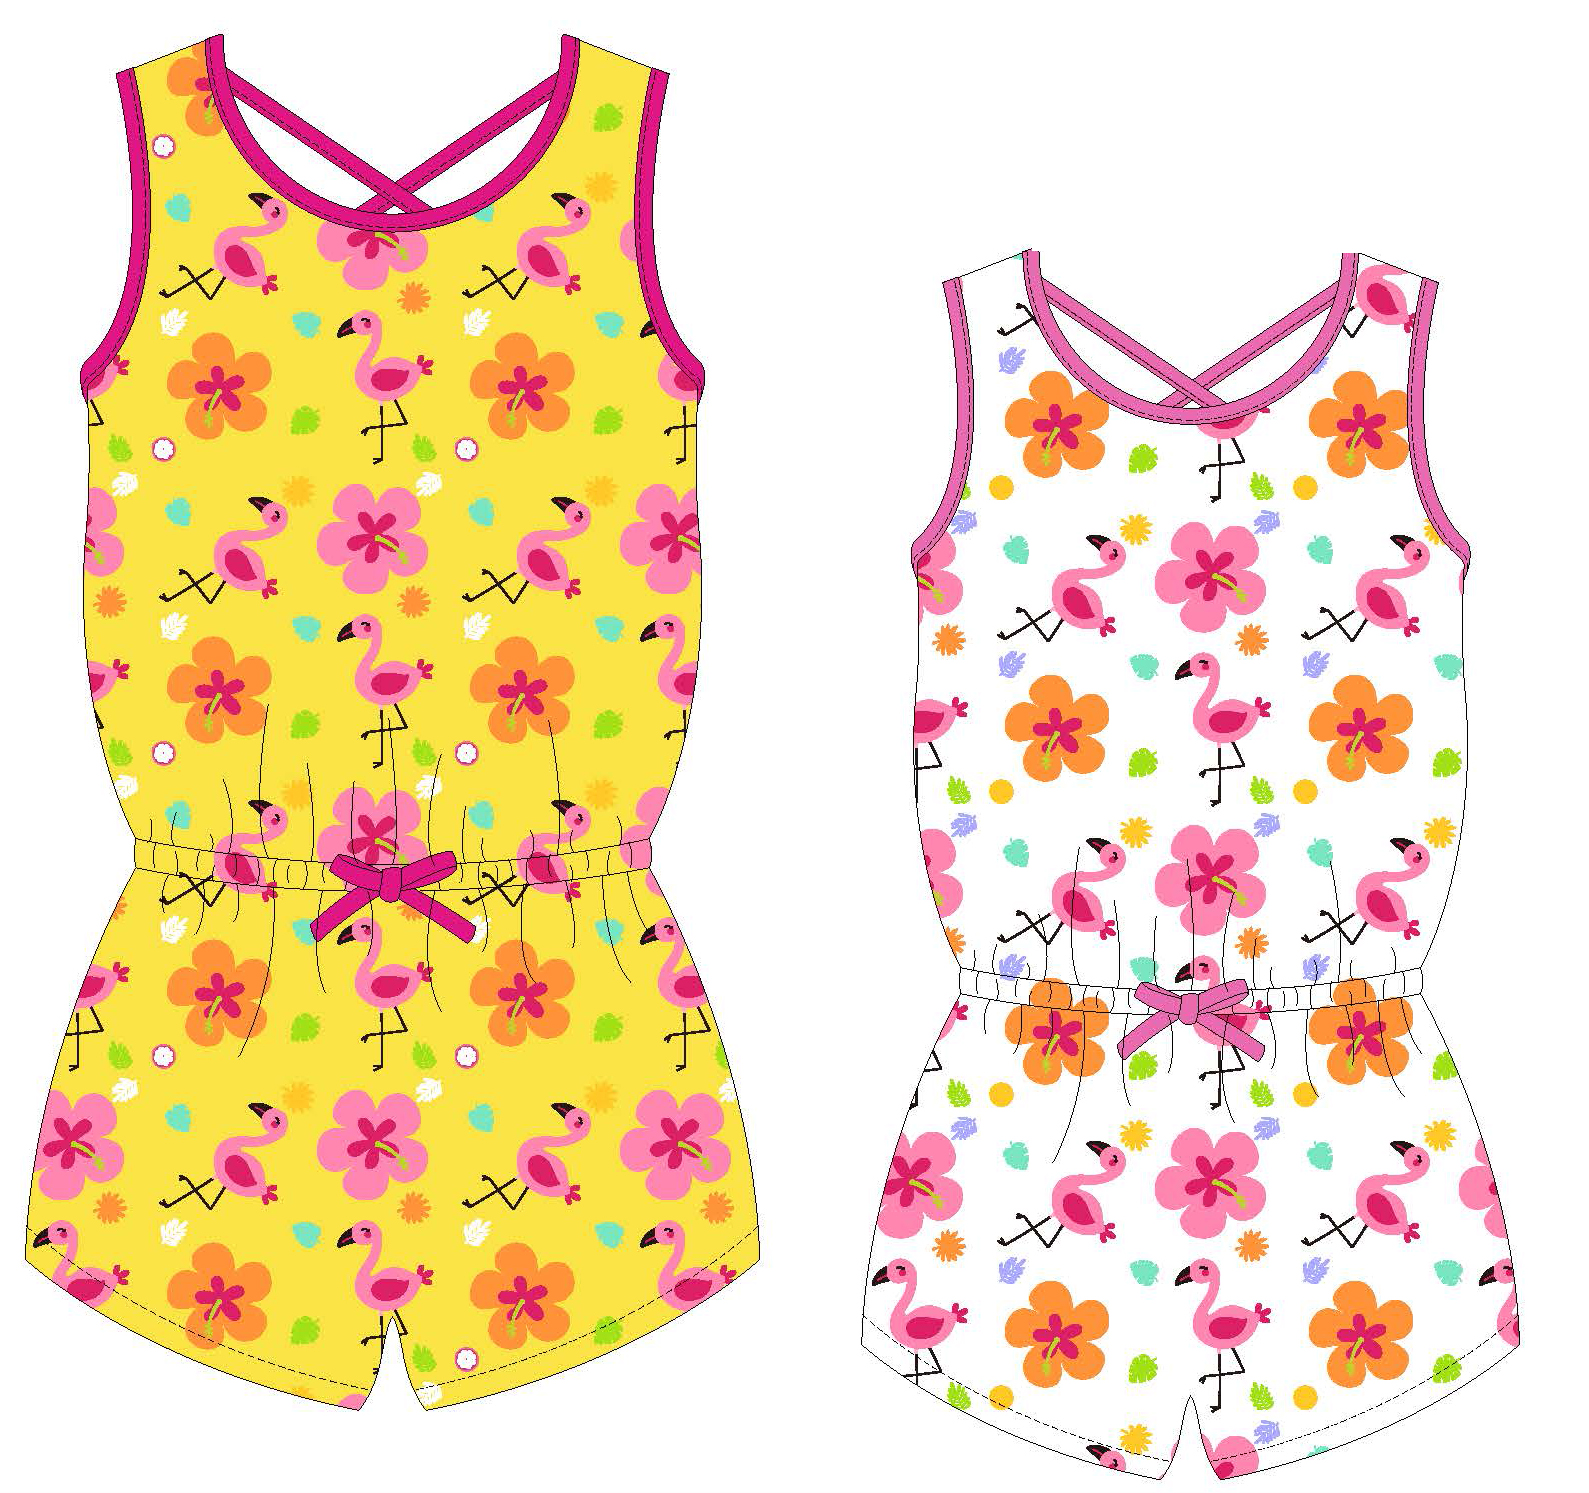 Toddler's Knit One-Piece Tank Rompers w/ FLAMINGO Print - Sizes 2T-4T